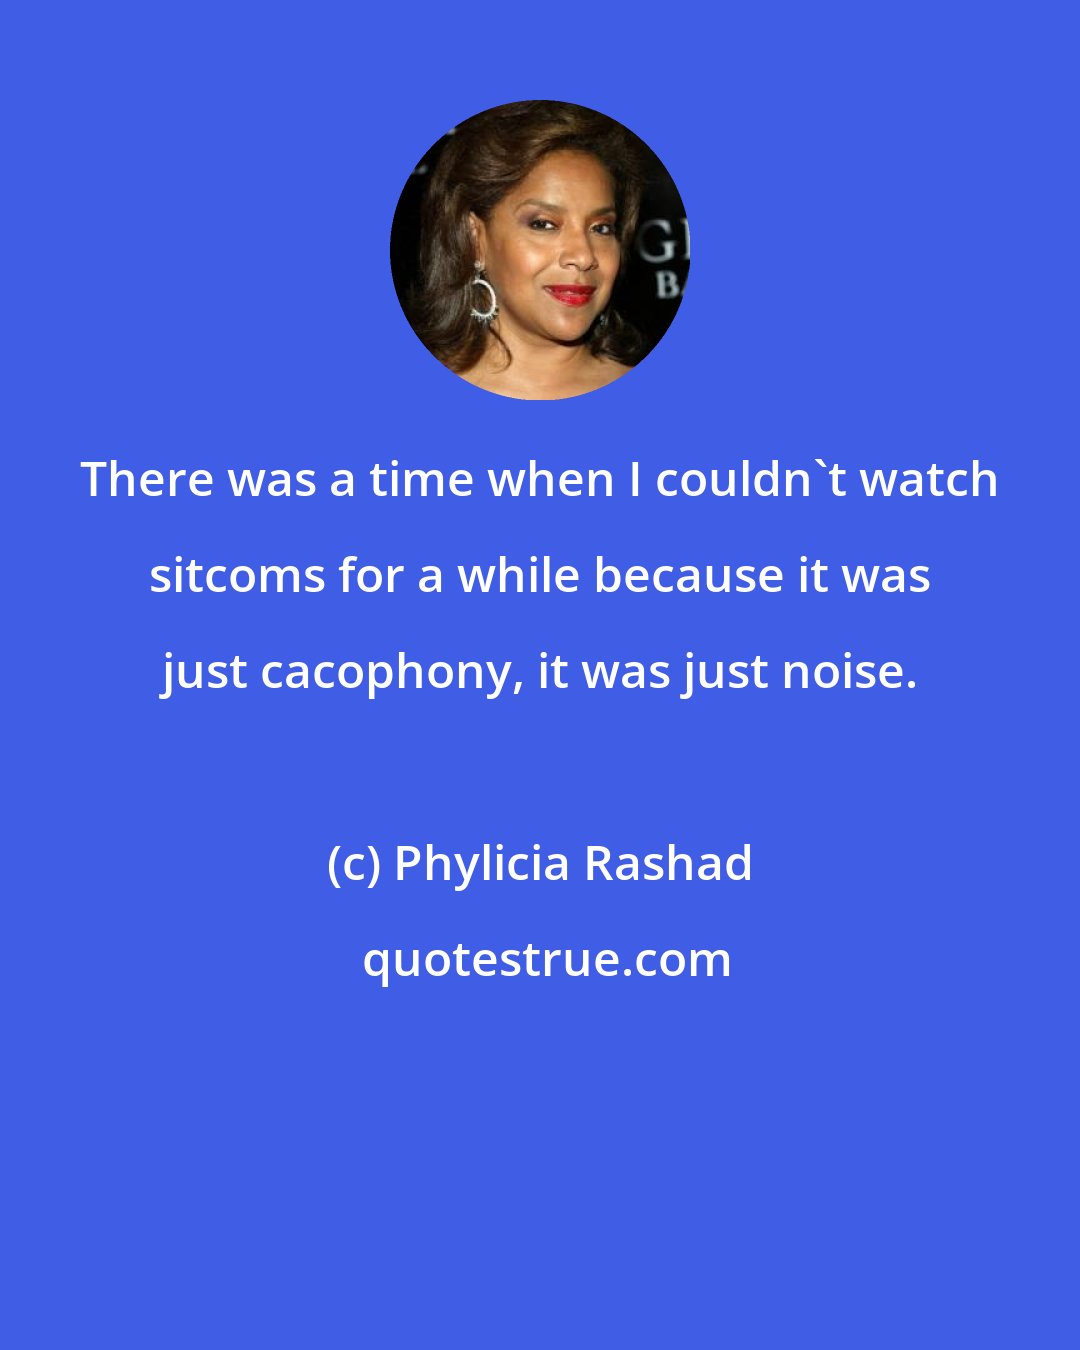 Phylicia Rashad: There was a time when I couldn't watch sitcoms for a while because it was just cacophony, it was just noise.